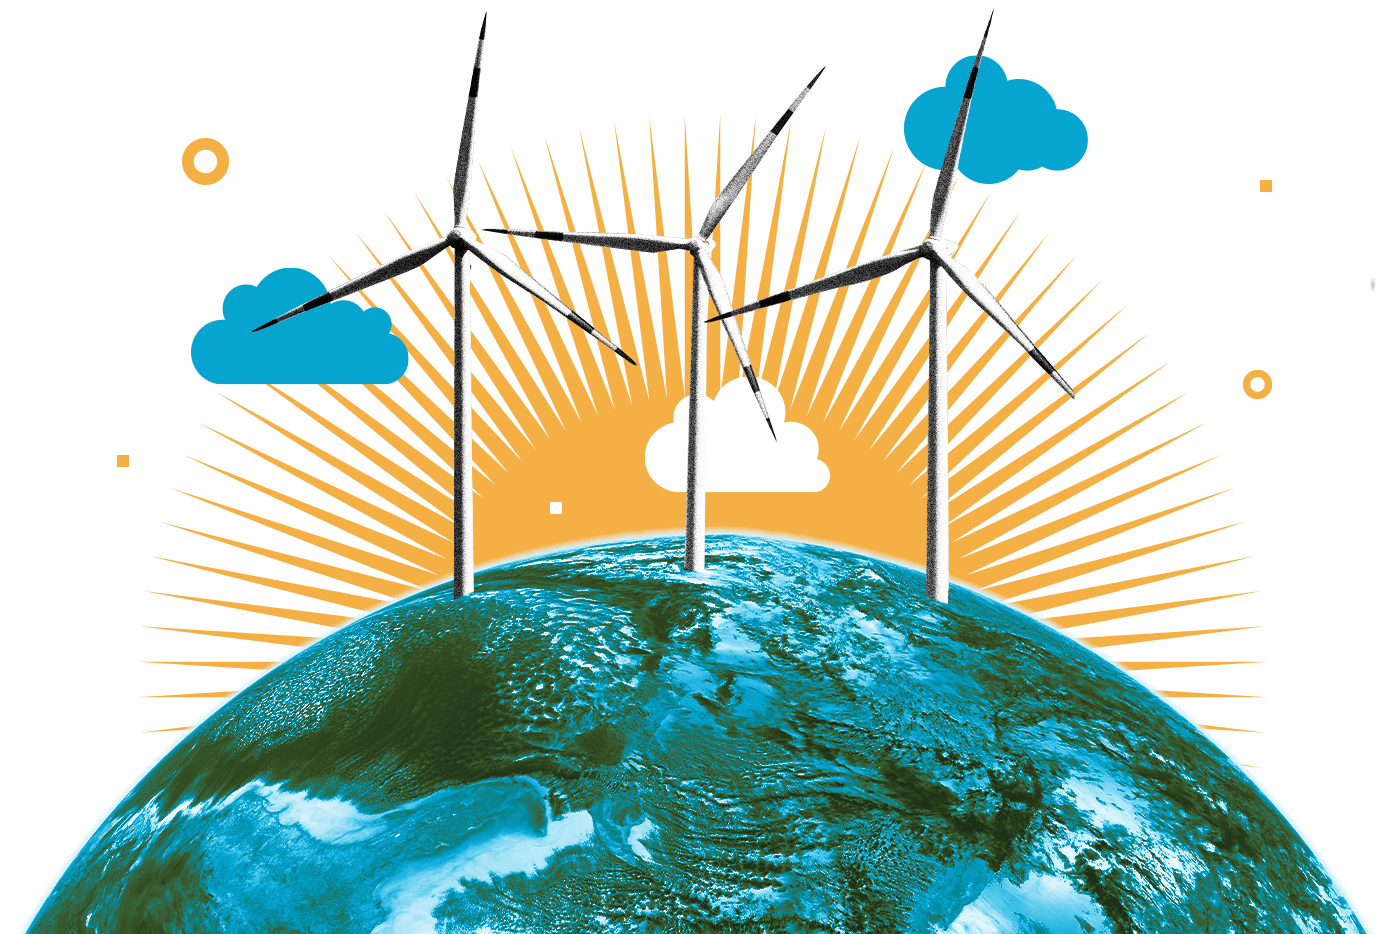 Illustration depicting planet Earth with windmills and a rising sun in the background